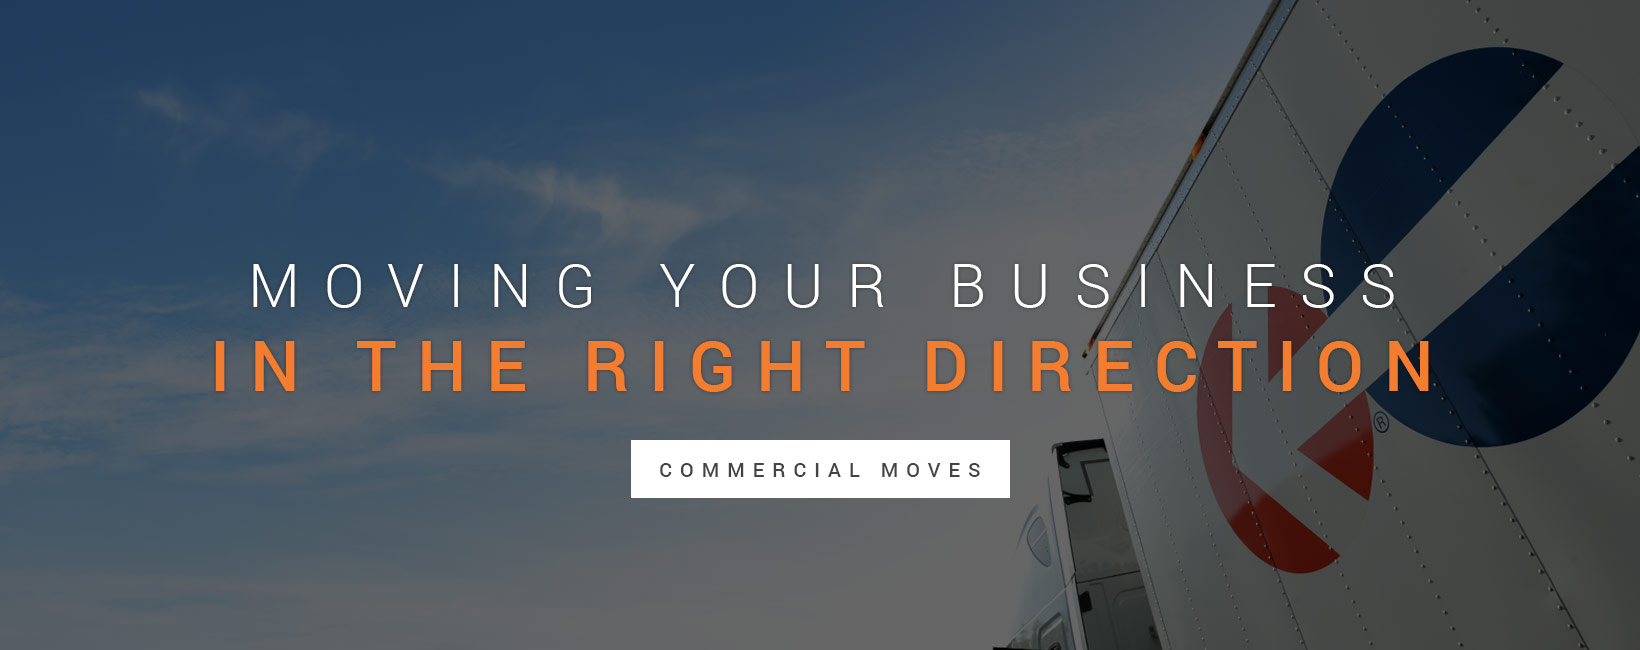 Moving Your Business in the Right Direction - Commercial Moves